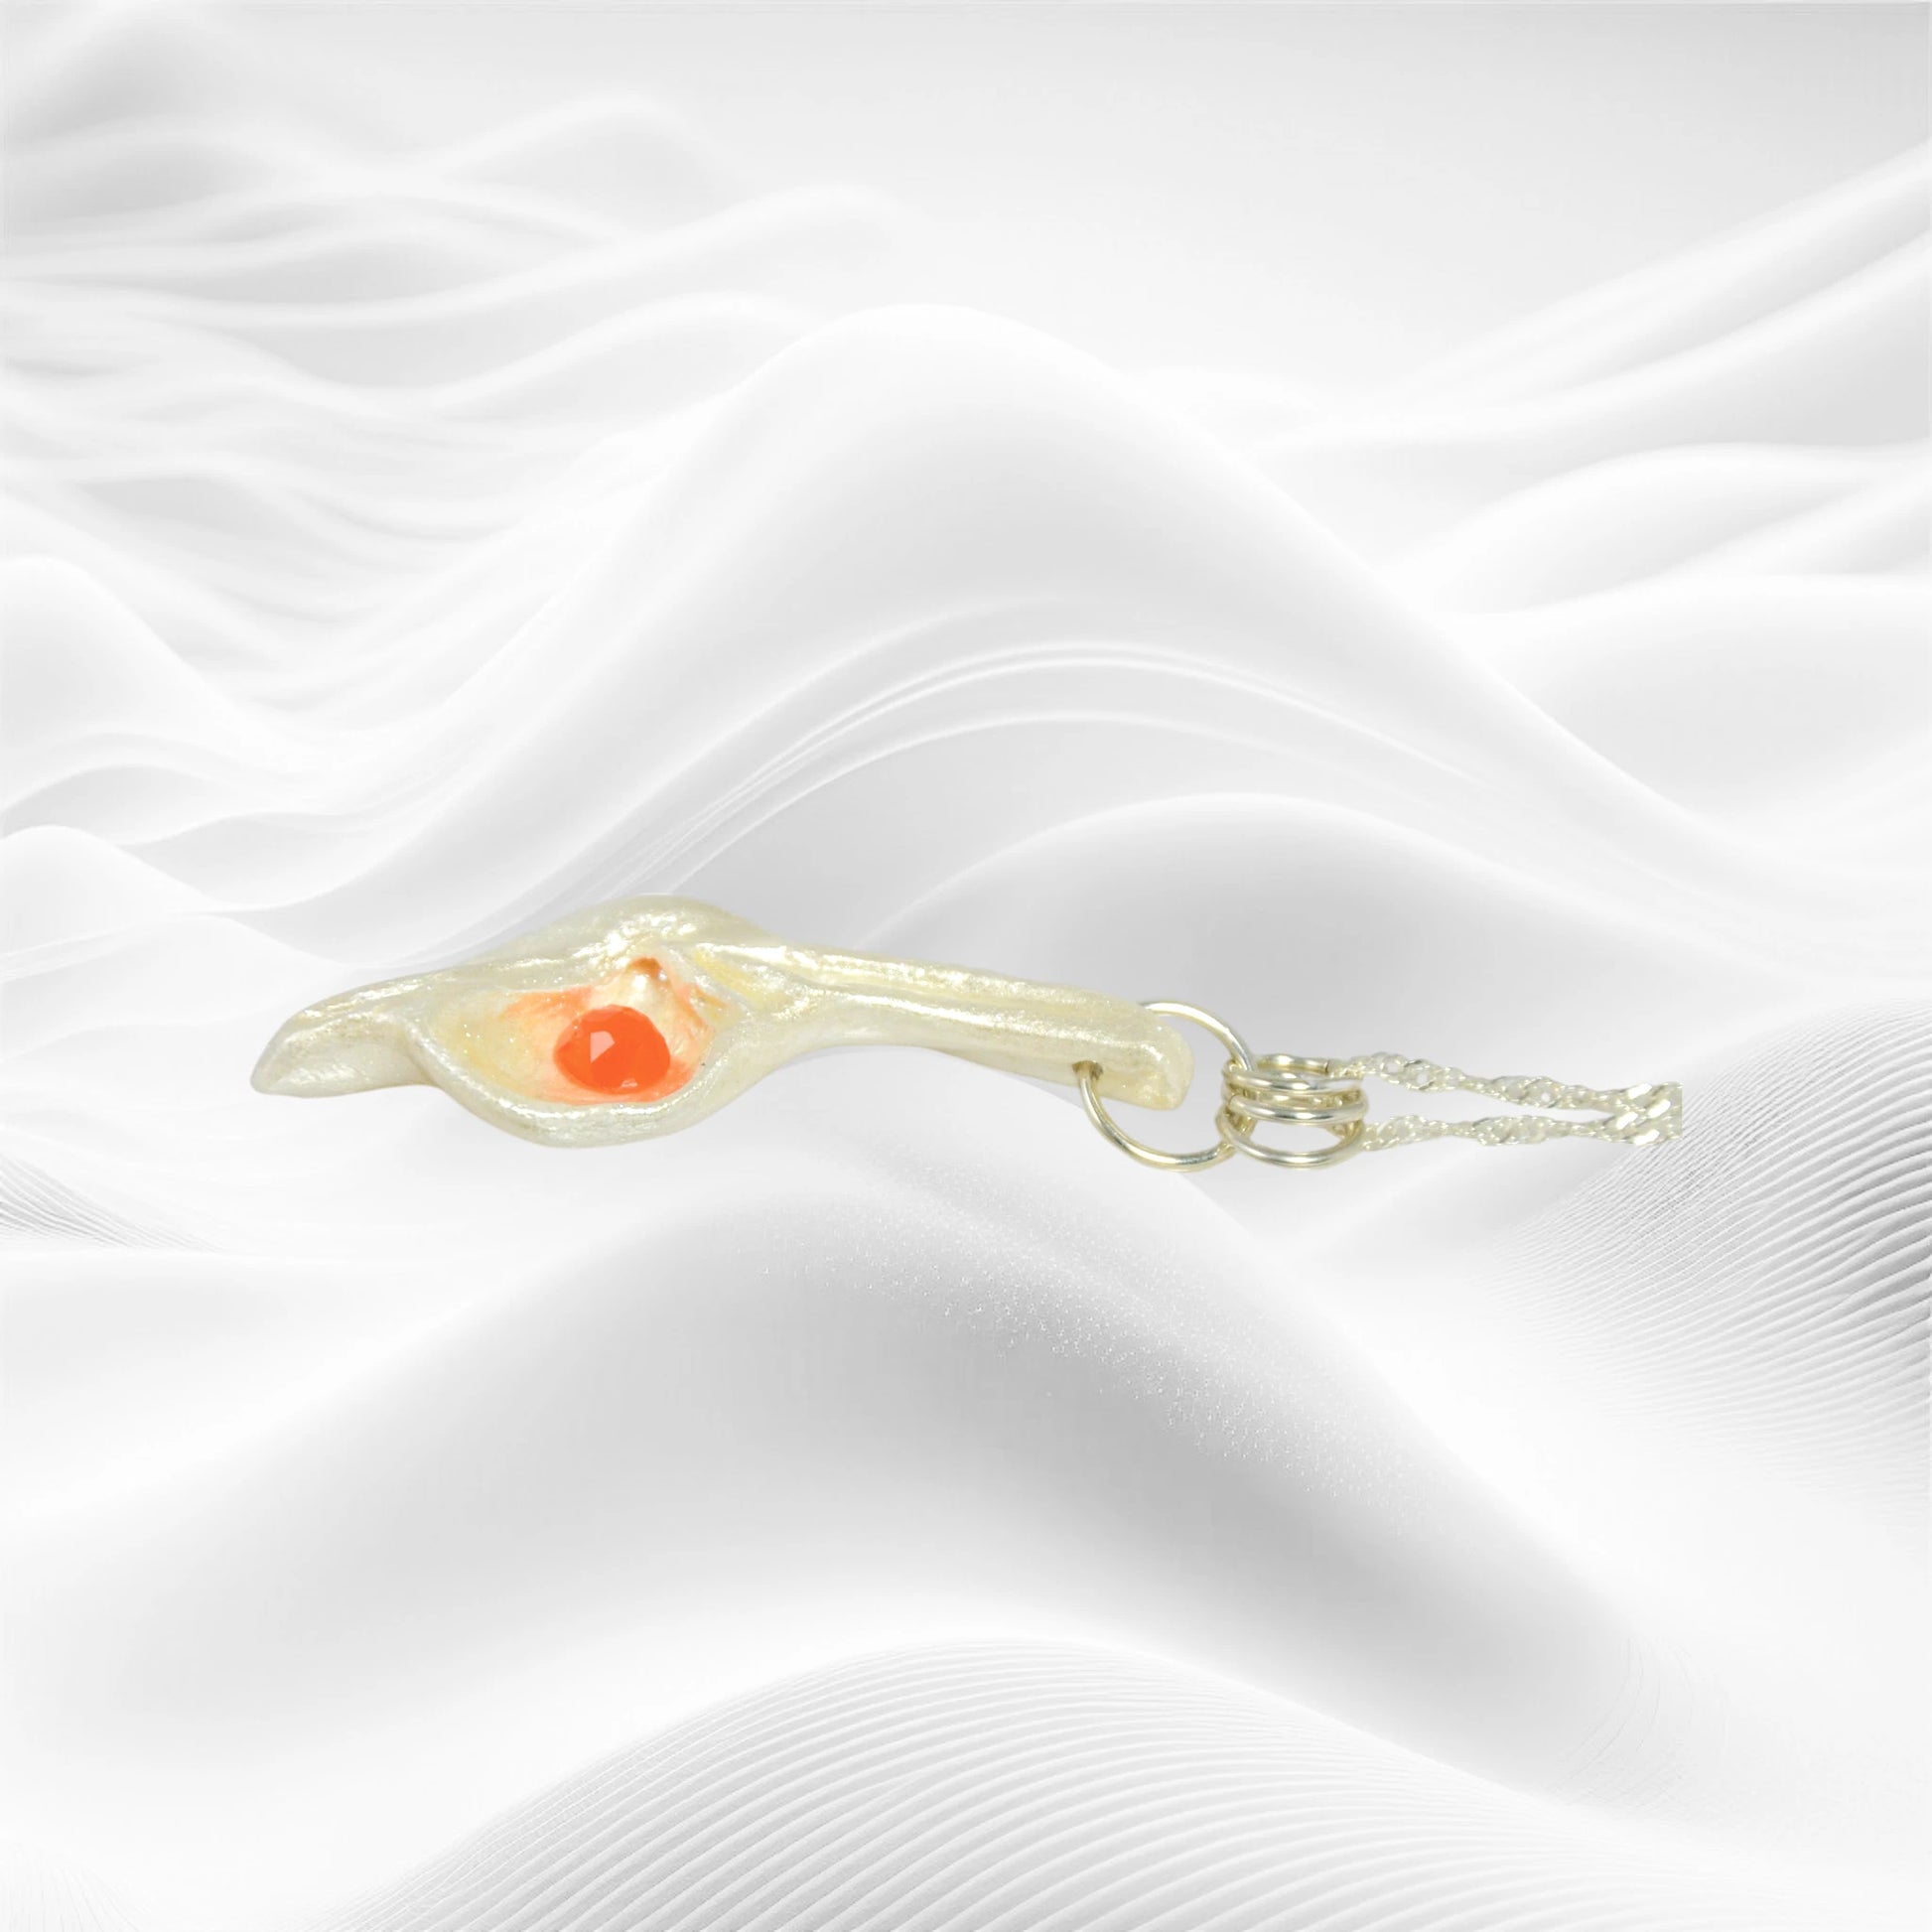 Natural Seashell pendant, elevating the beautiful natural nuances to new heights. The pendant is perfectly adorned with a mesmerizing rose cut Carnelian gemstone. The pendant is laying on a white wavy background.